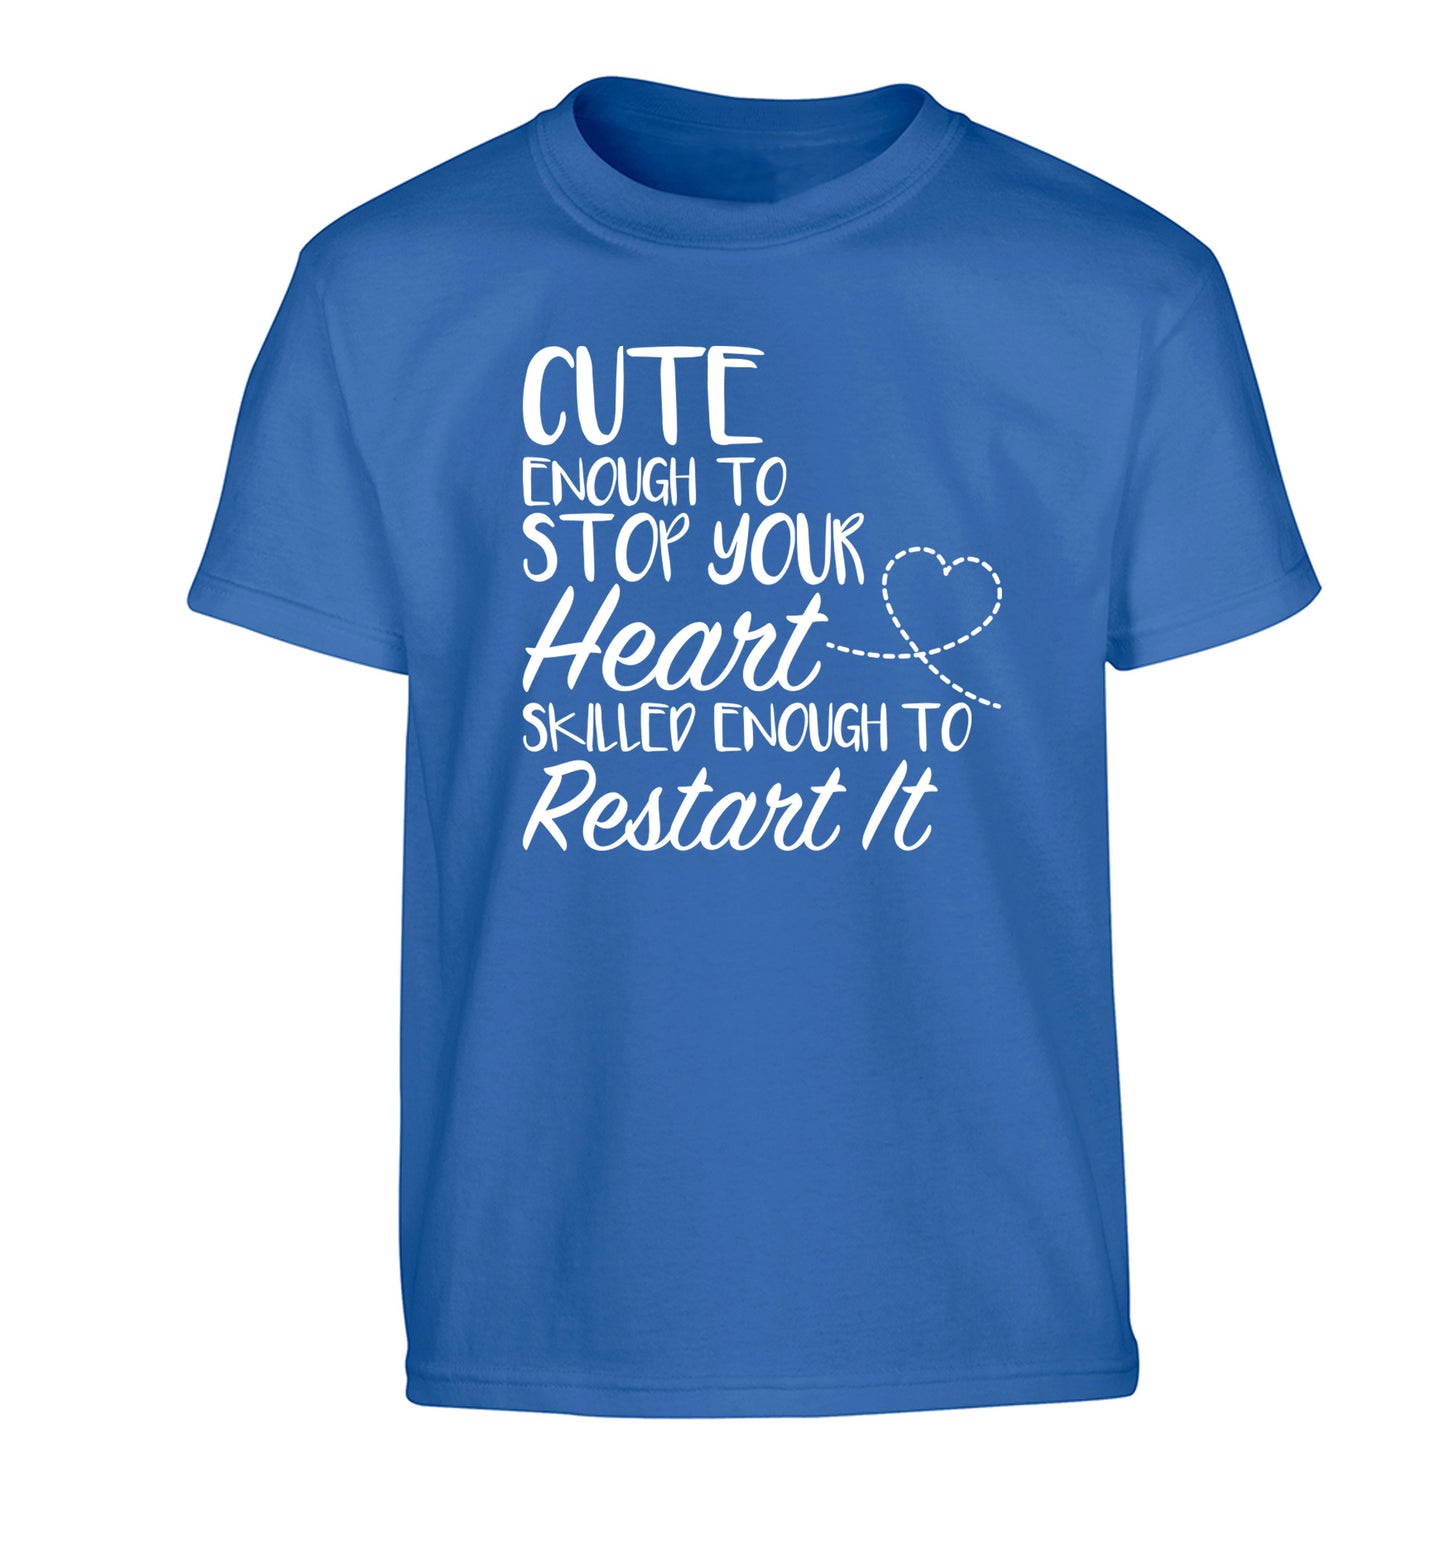 Cute enough to stop your heart skilled enough to restart it Children's blue Tshirt 12-13 Years